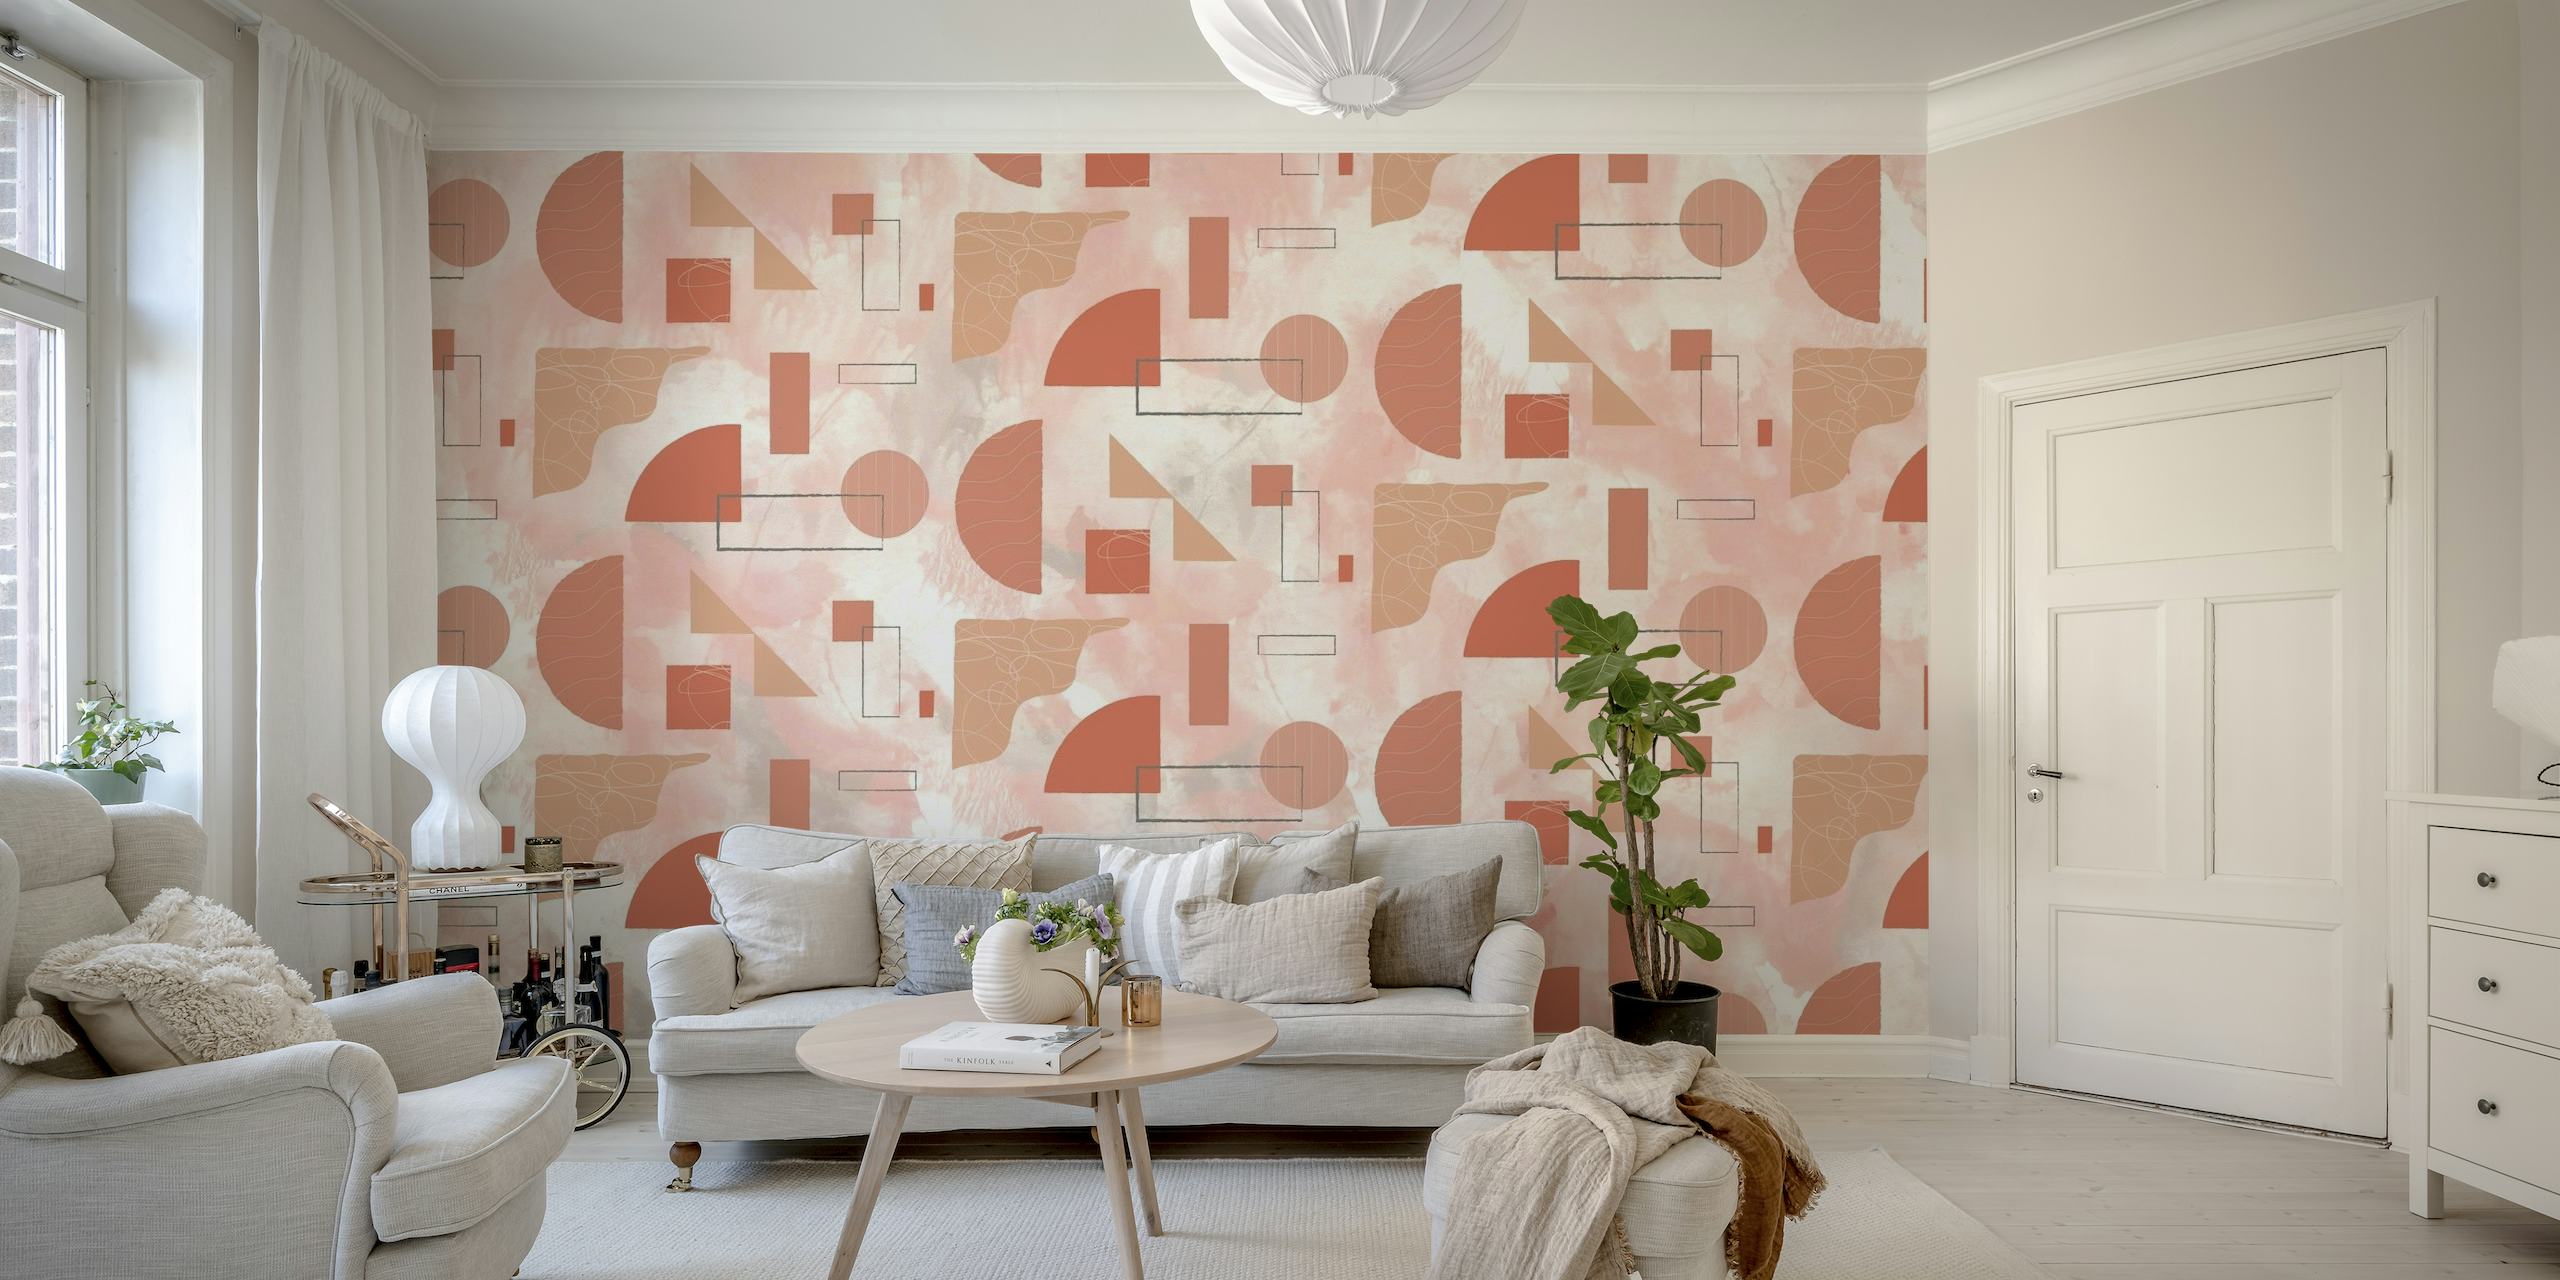 Abstract geometric wall mural with shapes and lines in blush and cream tones